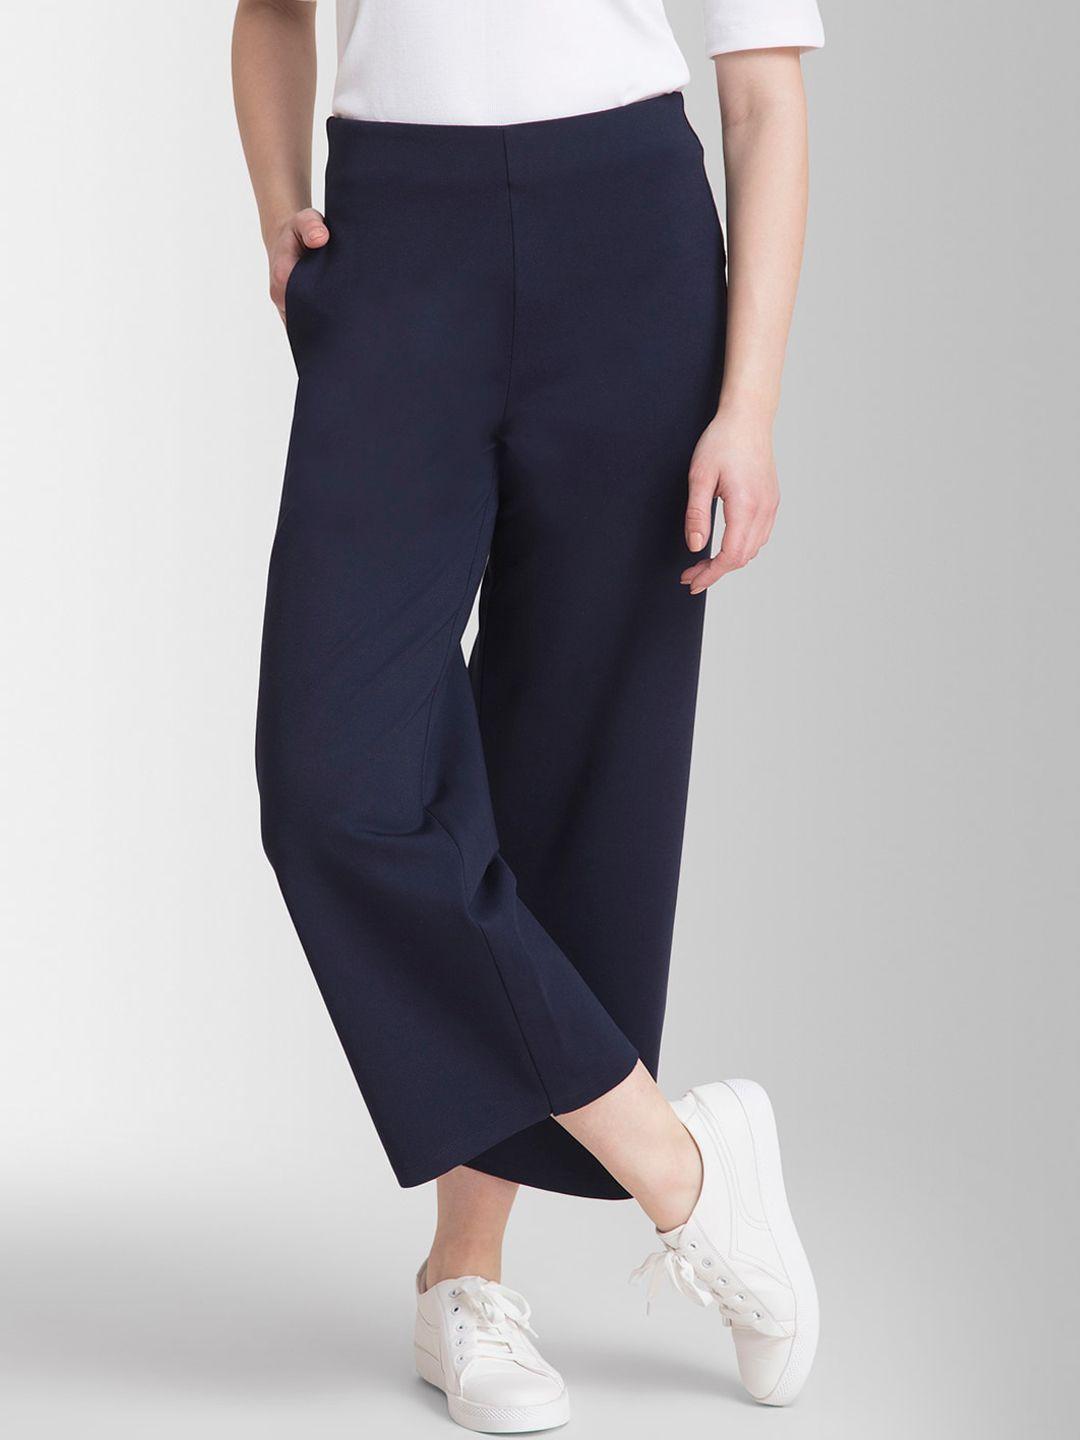 fablestreet women navy blue loose fit solid livin culottes